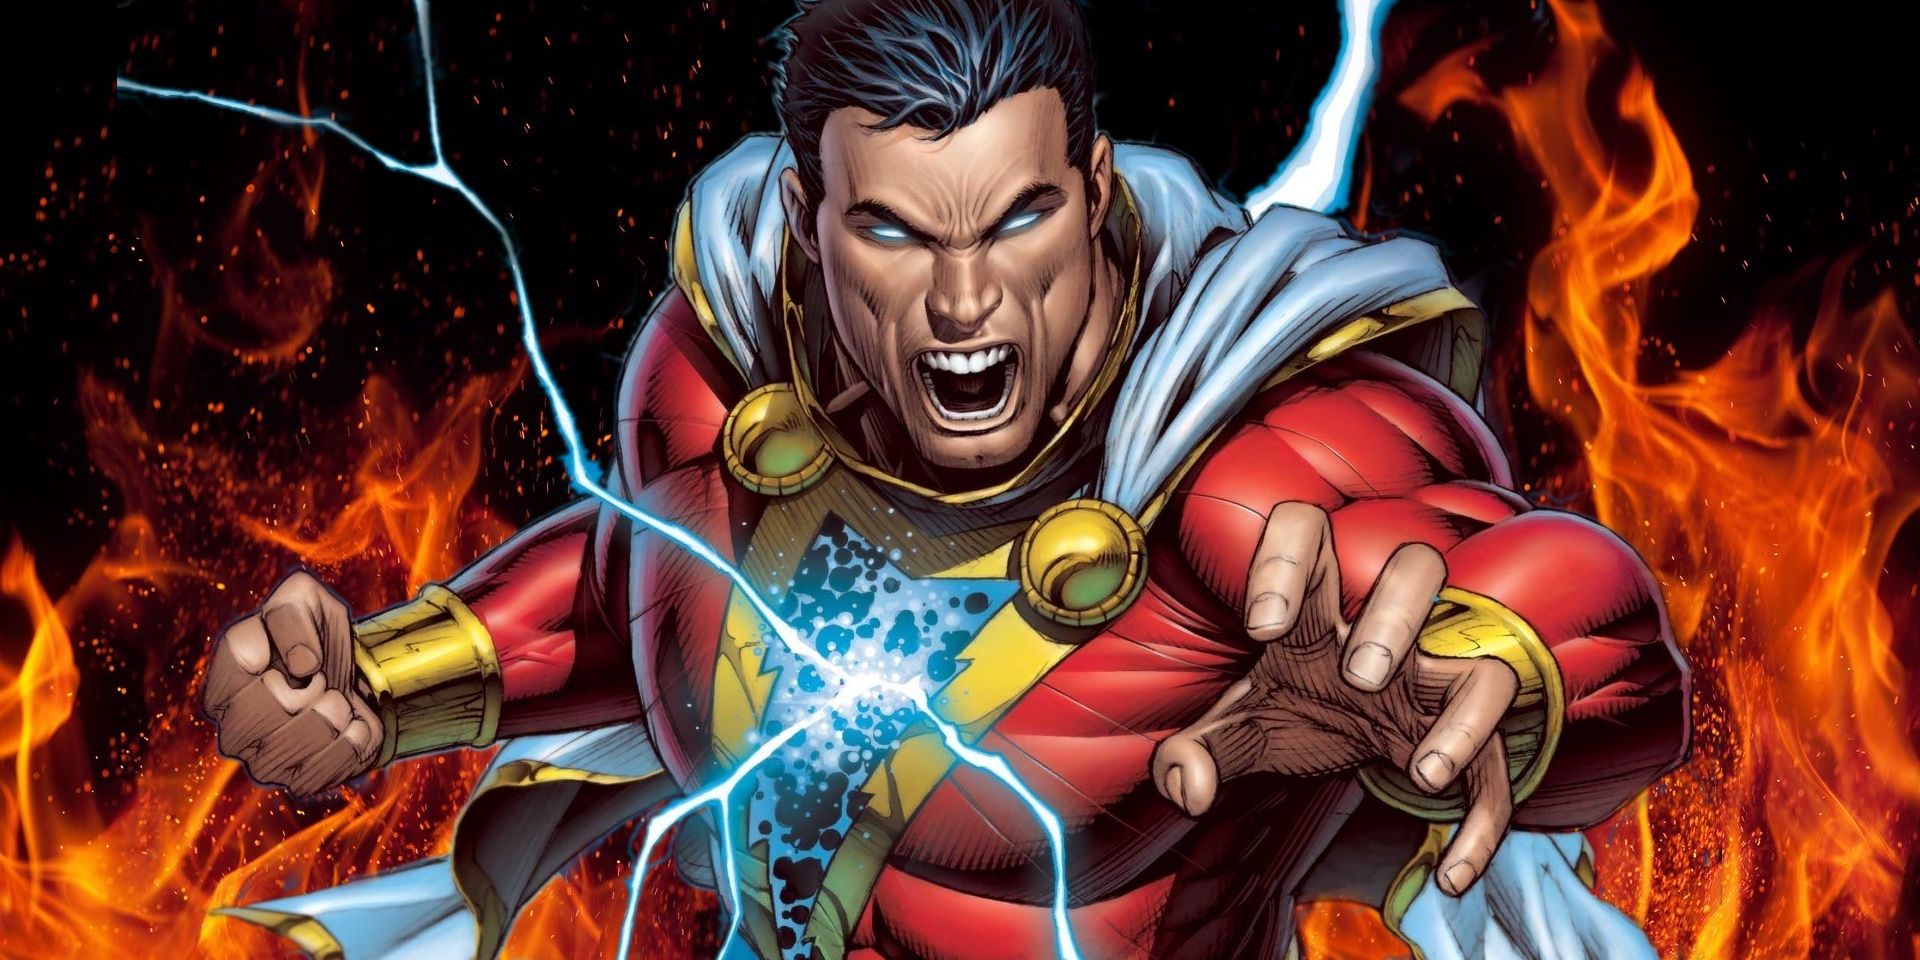 Shazam! Is Headed To Hell To Get His Powers Back